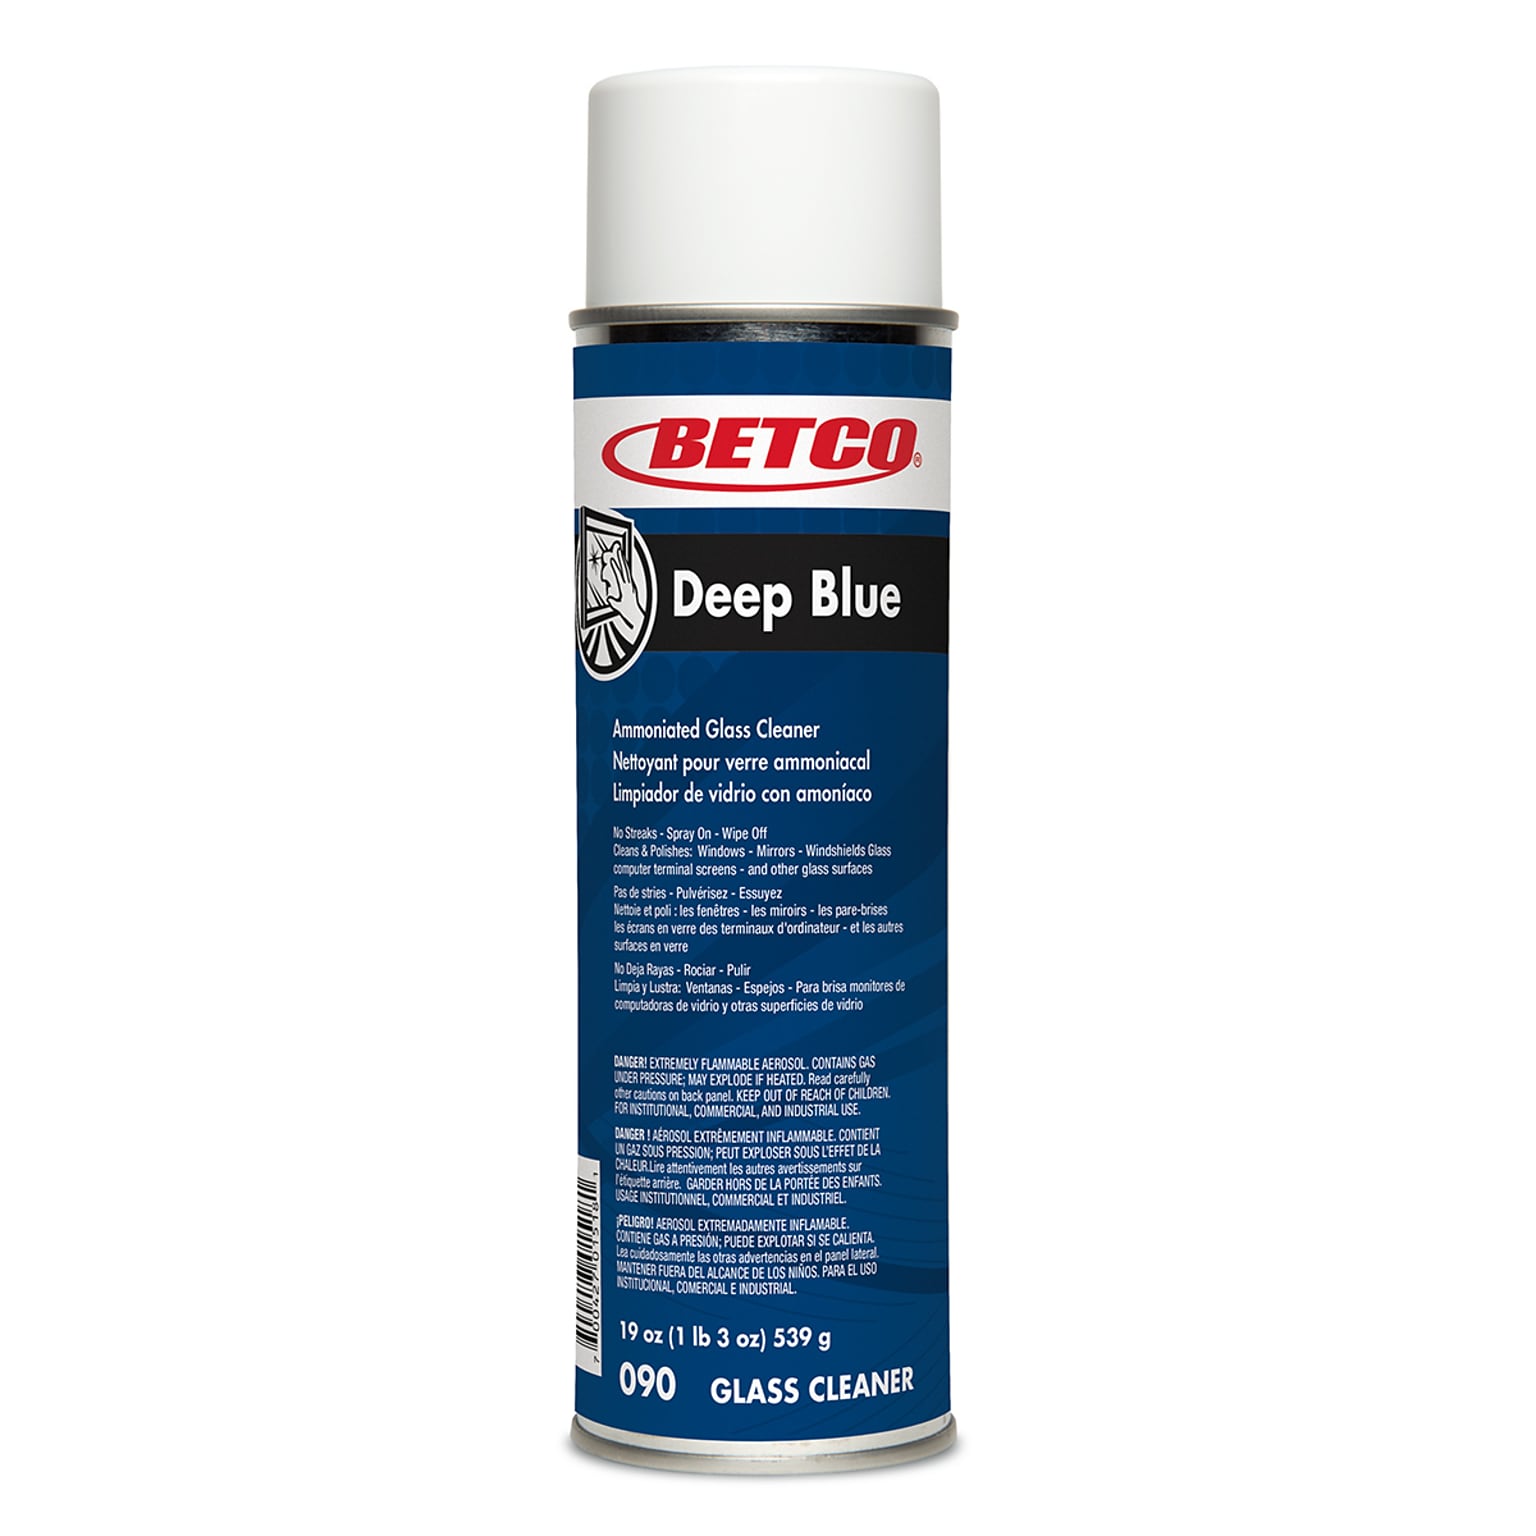 Betco Deep Blue Glass and Surface Cleaner, Fresh, 19 oz., 12/Carton (902300)